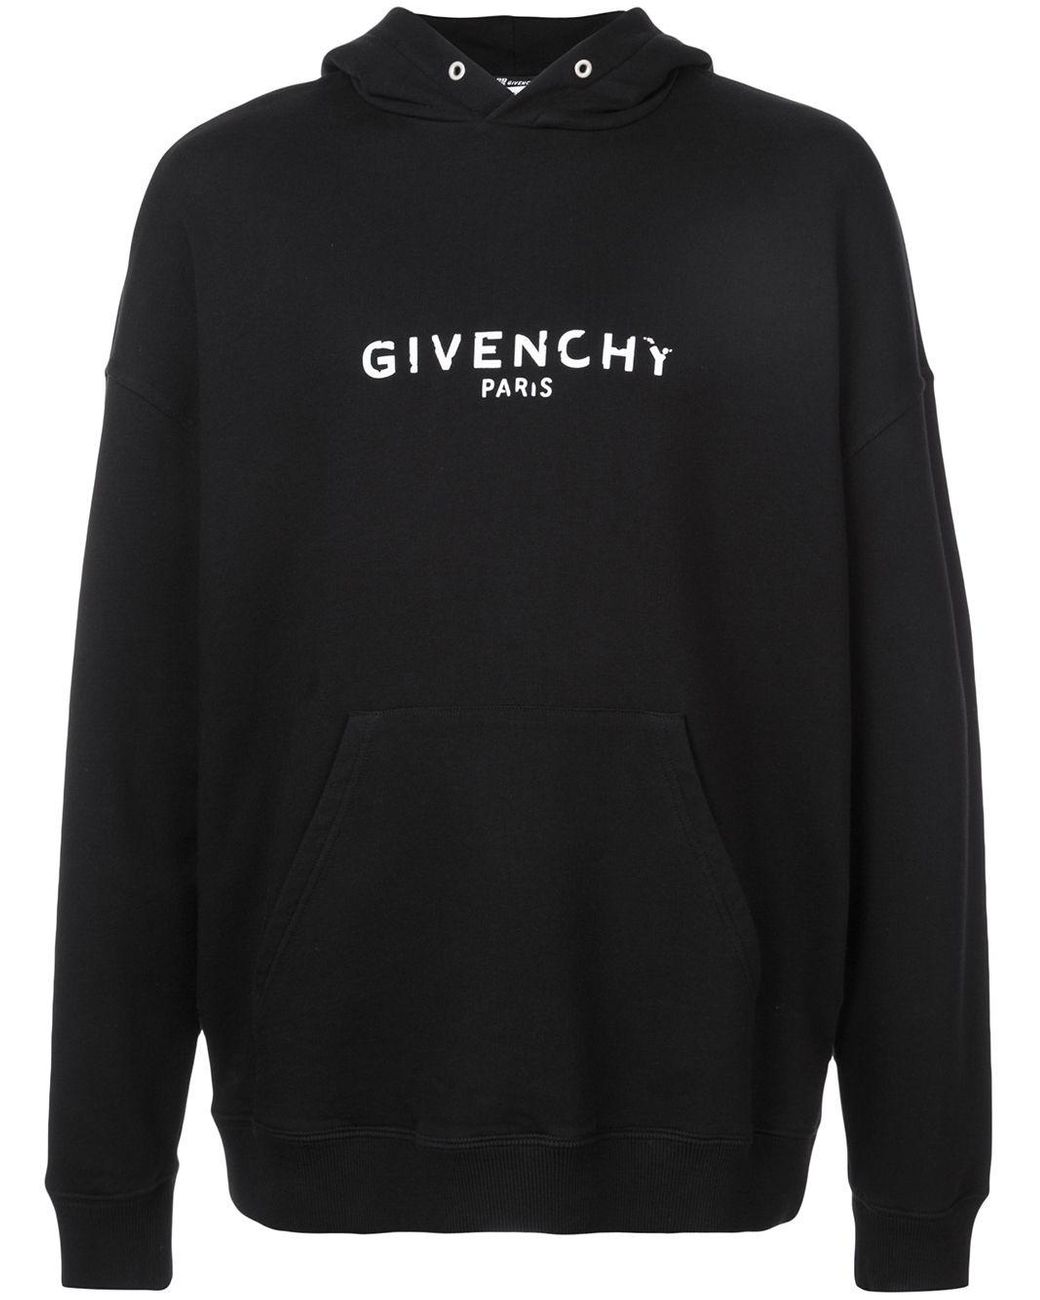 Givenchy Cotton Hoodie in Black for Men - Save 12% - Lyst